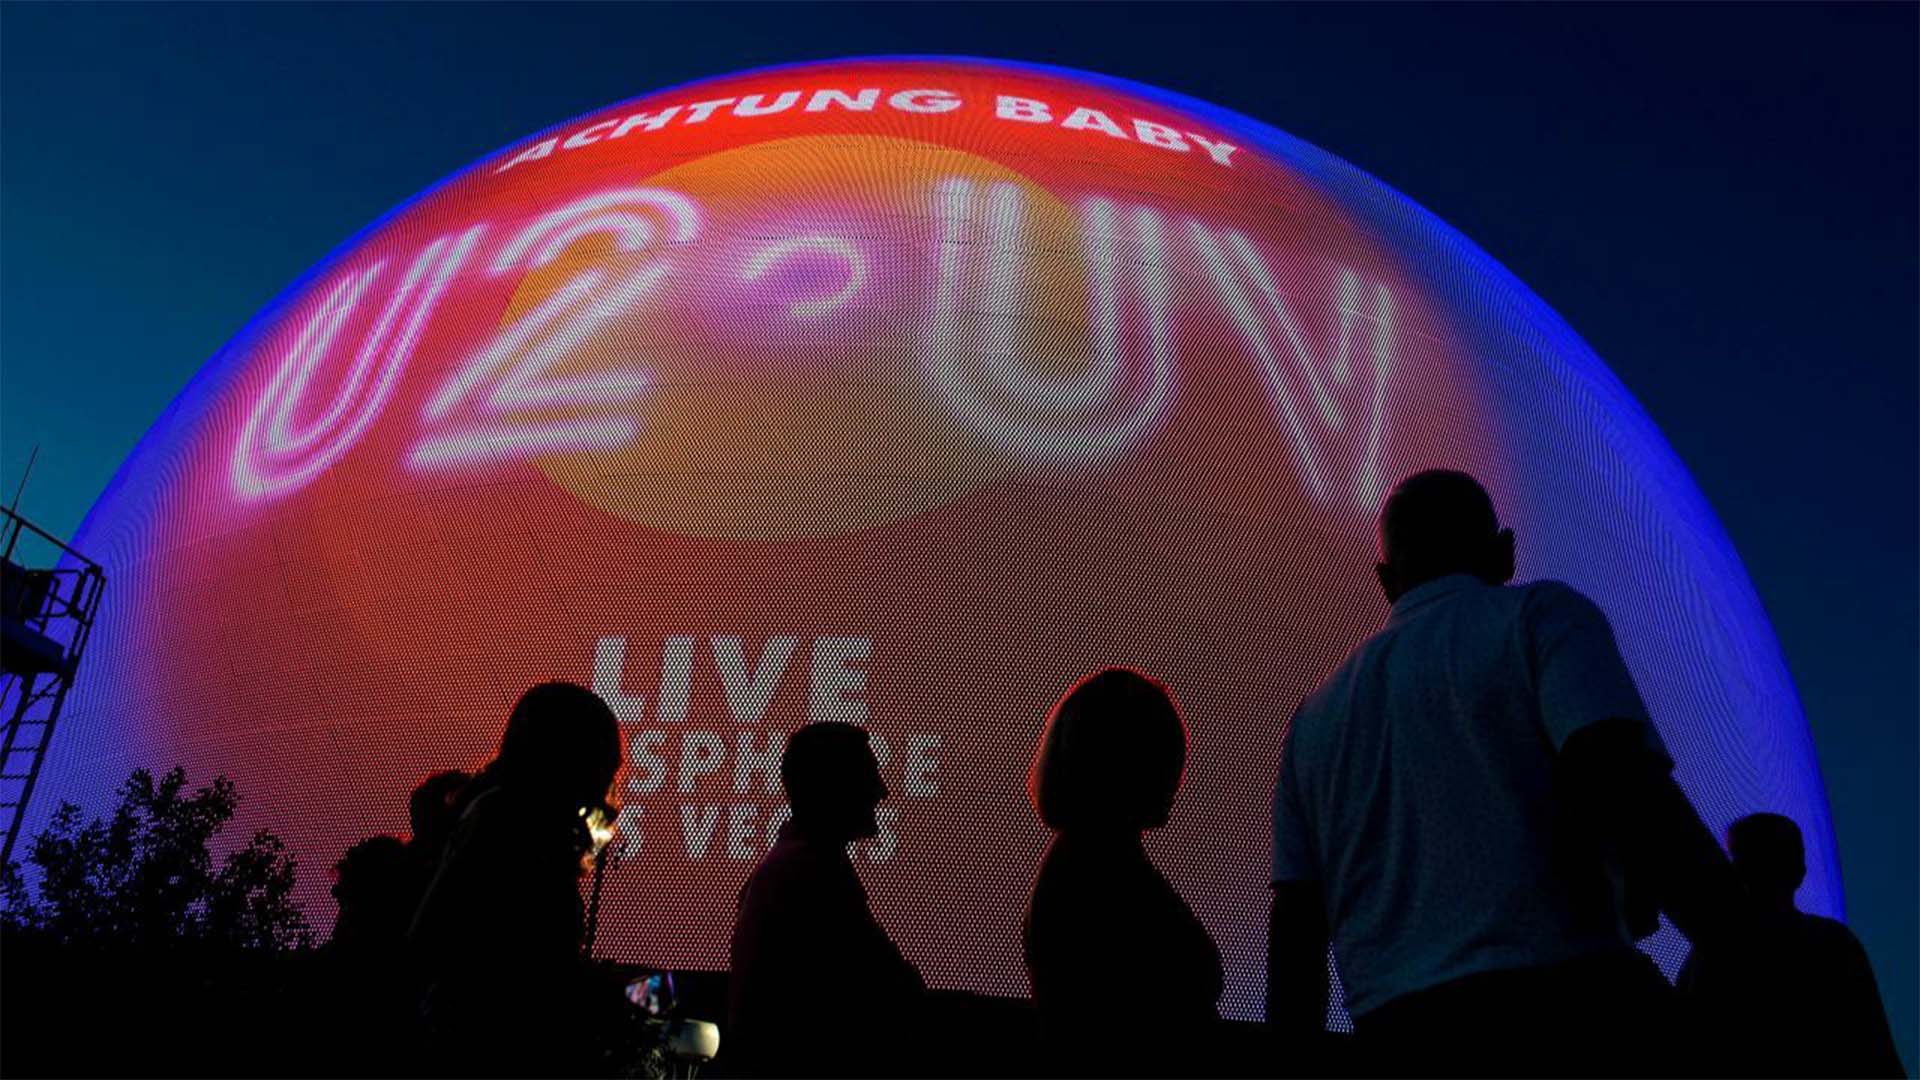 Las Vegas Sphere Hold First-Ever Event With U2 Concert